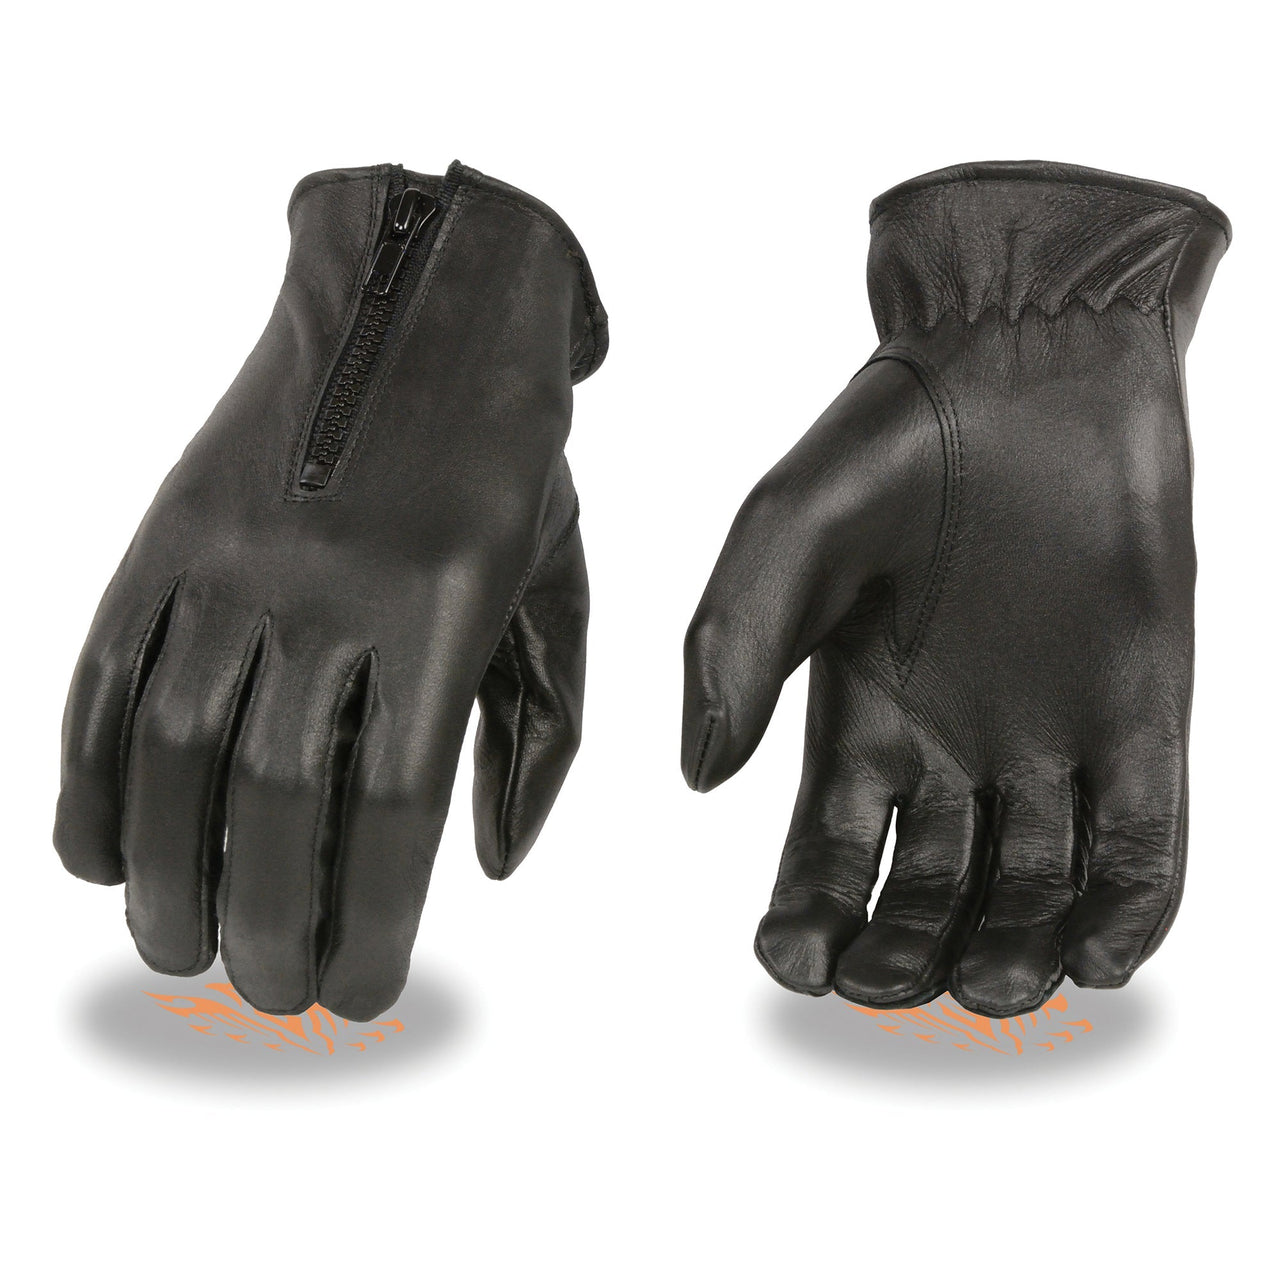 Ladies Unlined Leather Gloves w/ Zipper Closure - HighwayLeather